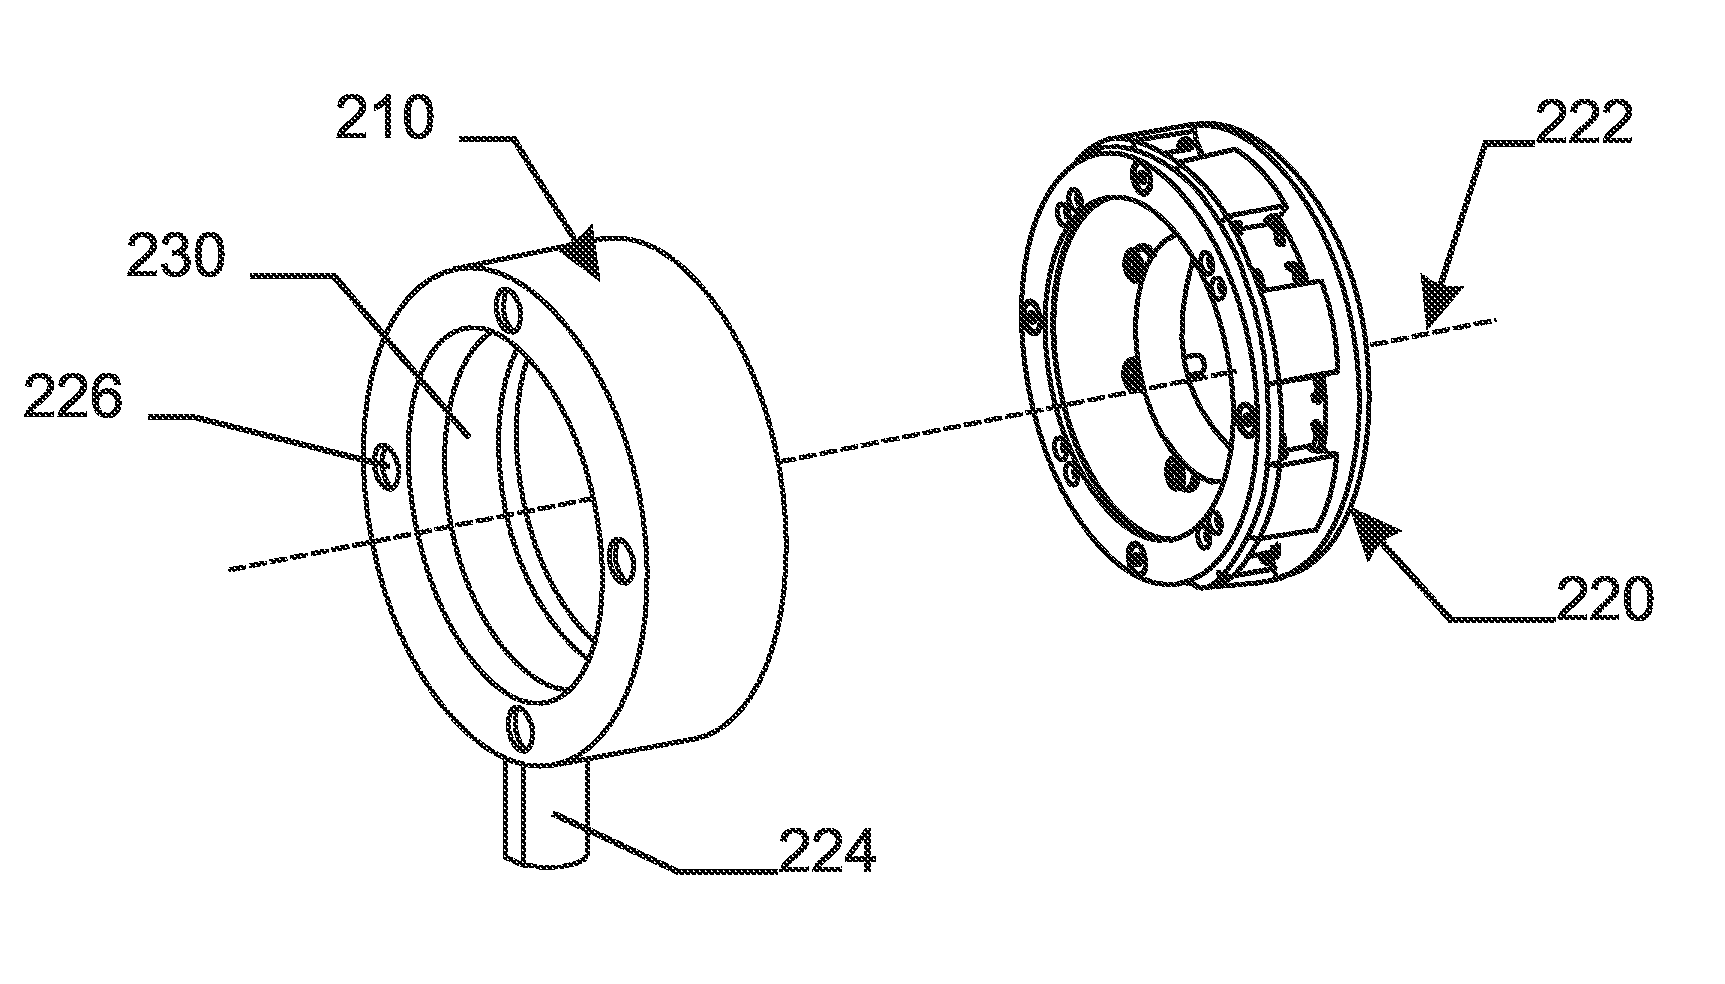 End-Block for a Rotatable Target Sputtering Apparatus